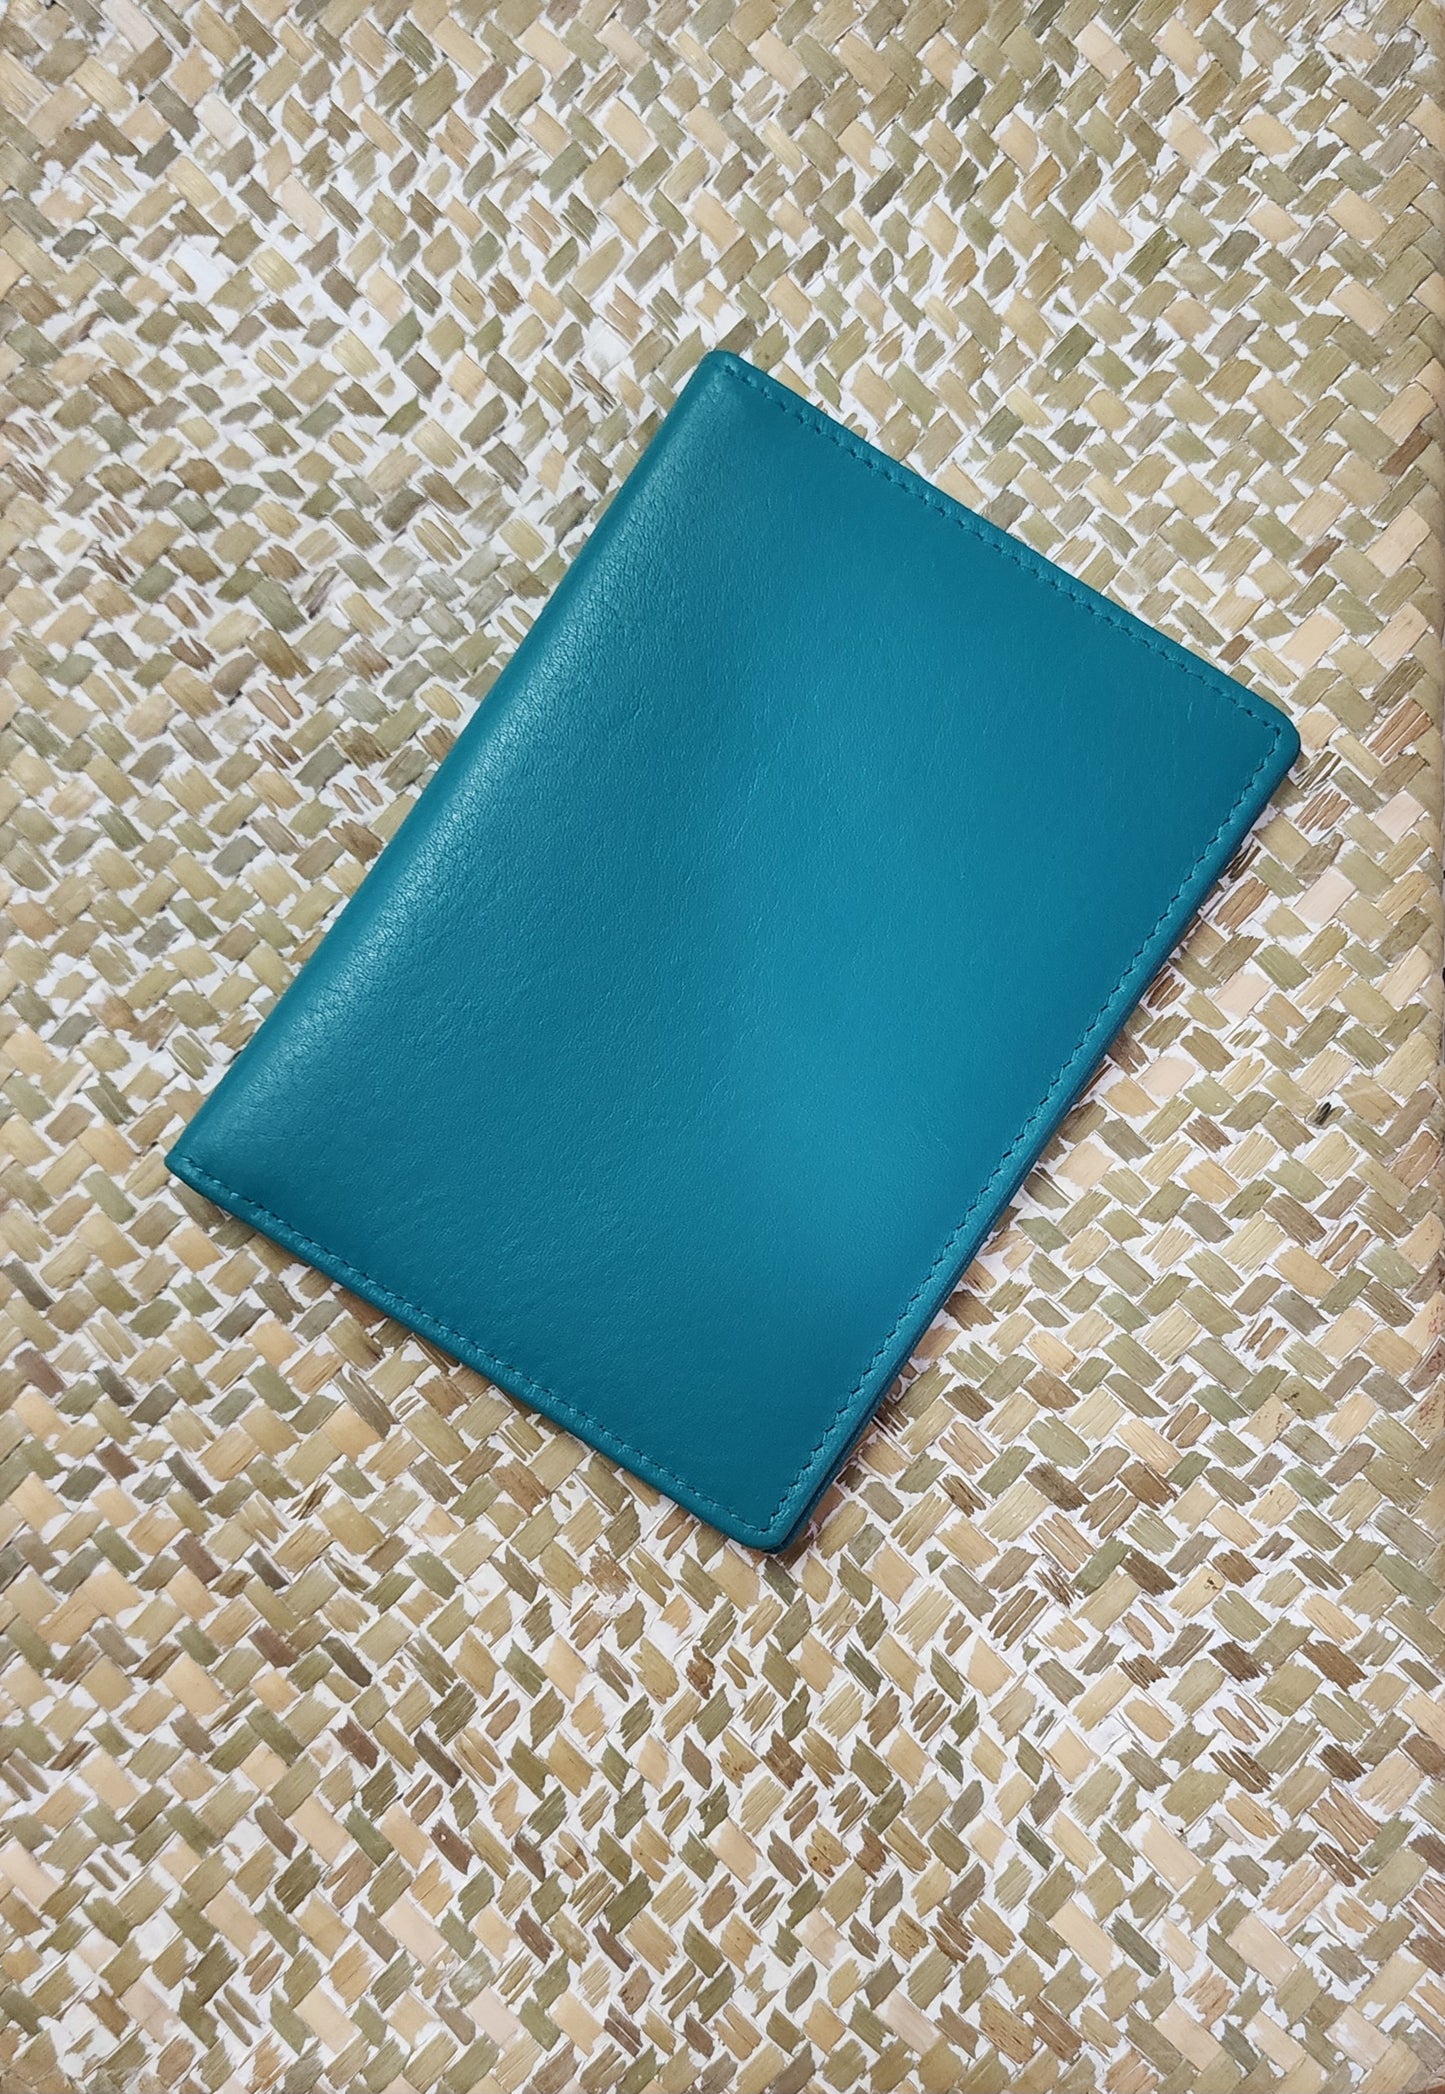 Passport cover -Teal